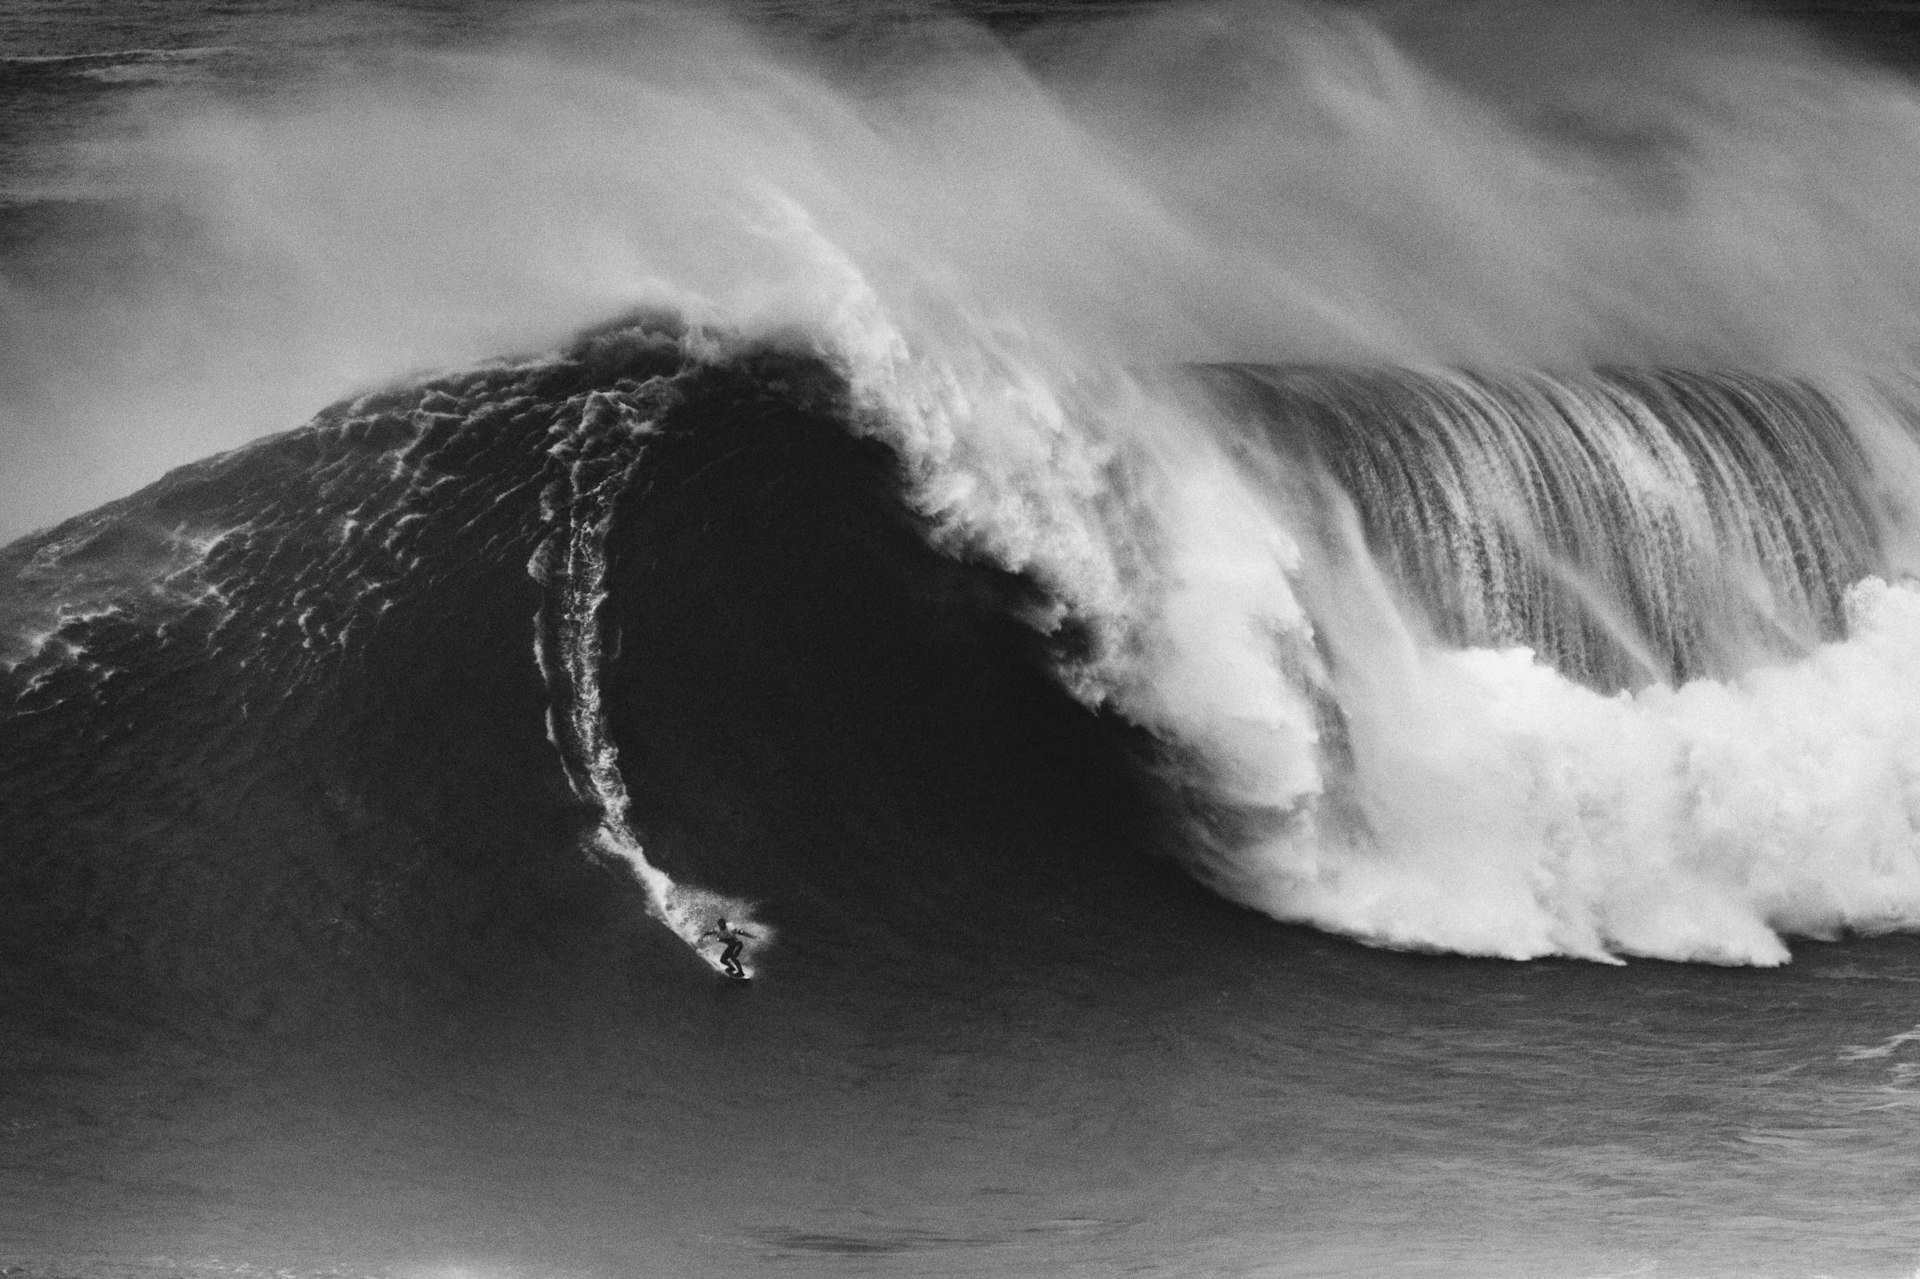 Riding giants: the behemothic art of big-wave surfing